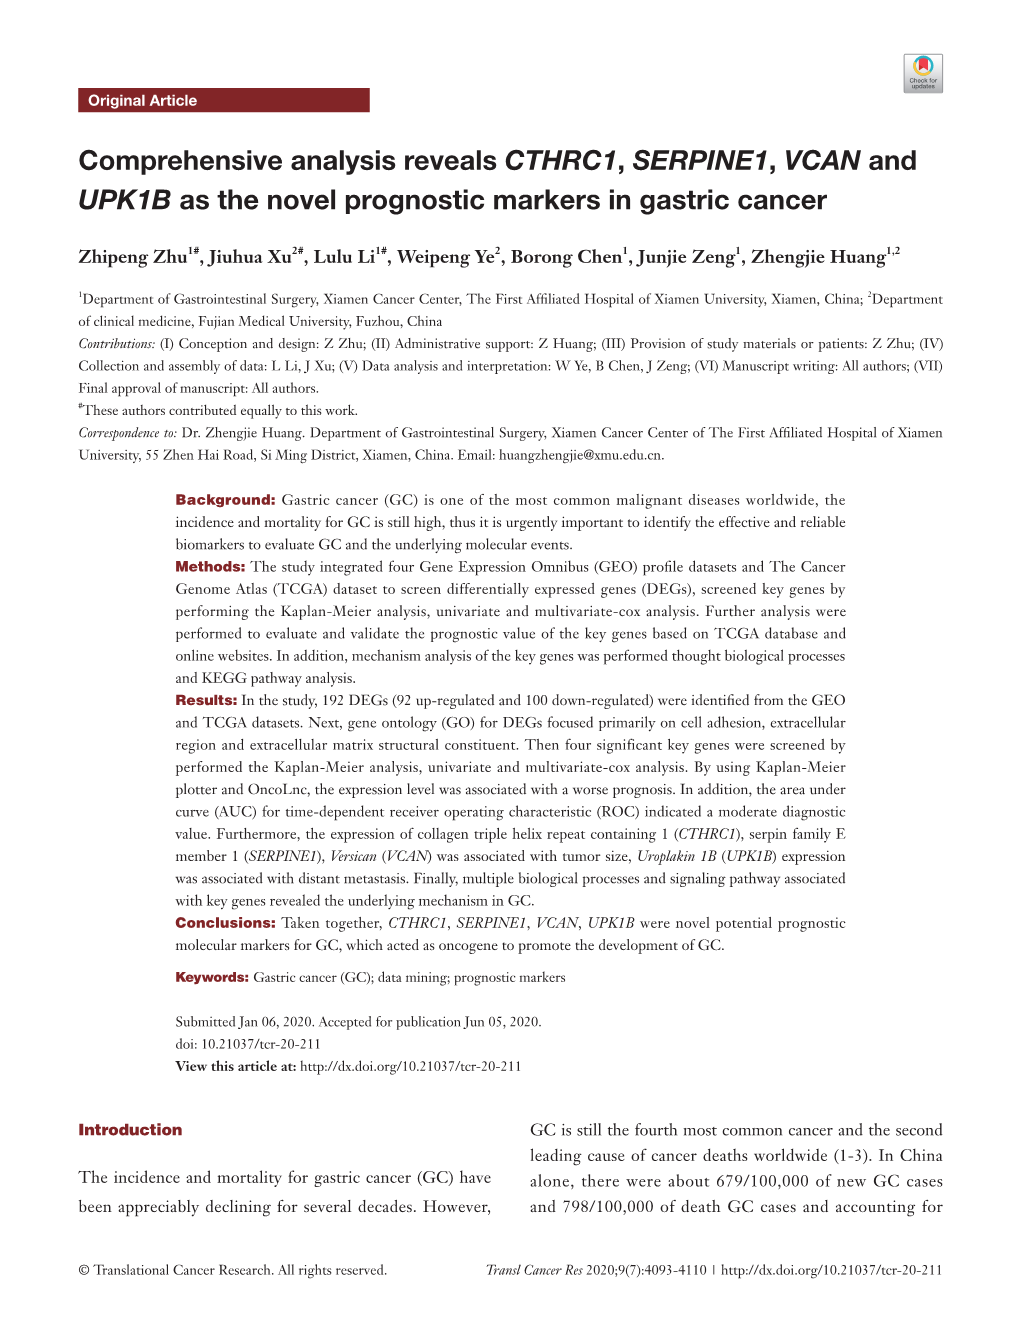 Comprehensive Analysis Reveals CTHRC1, SERPINE1, VCAN and UPK1B As the Novel Prognostic Markers in Gastric Cancer